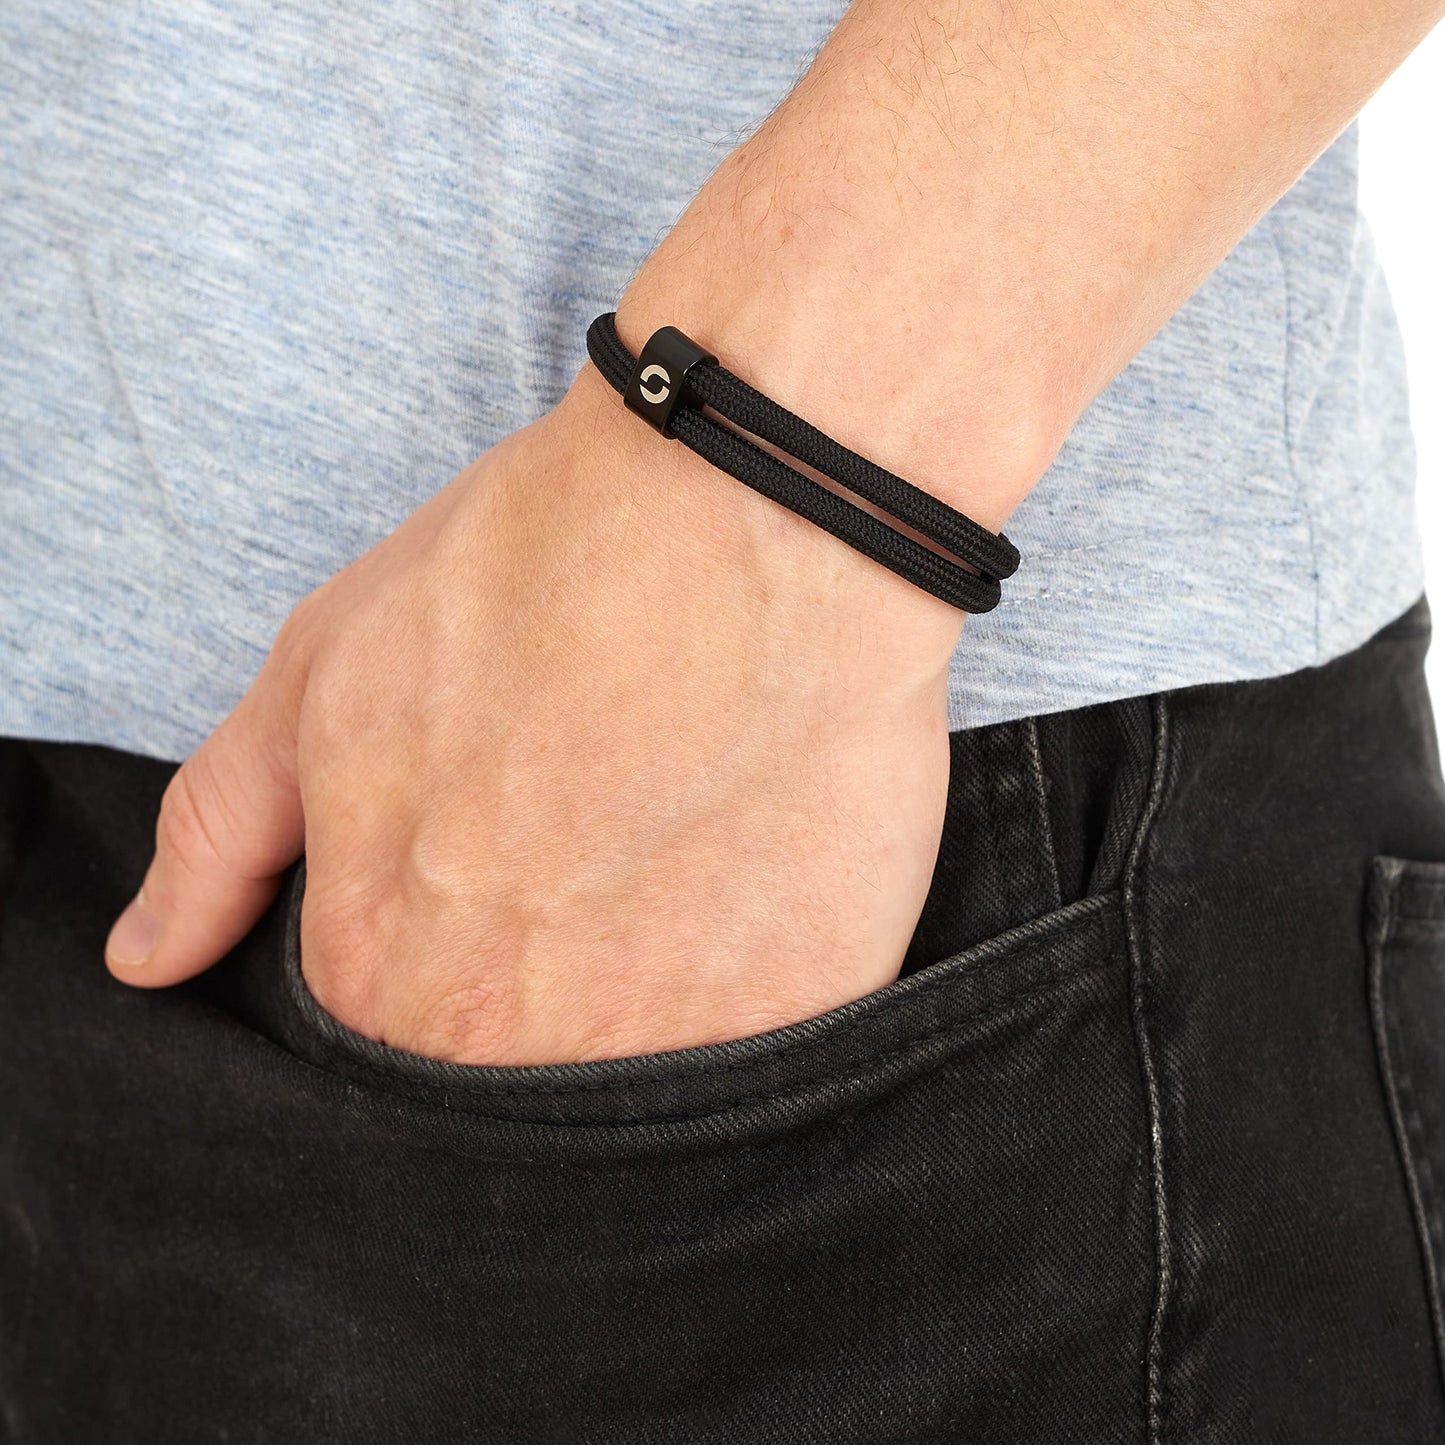 Adjustable Mens Bracelet Made of Durable Waterproof Rope | Stylish Accessory for Men | 10 Colors | Fits Any Wrist Size